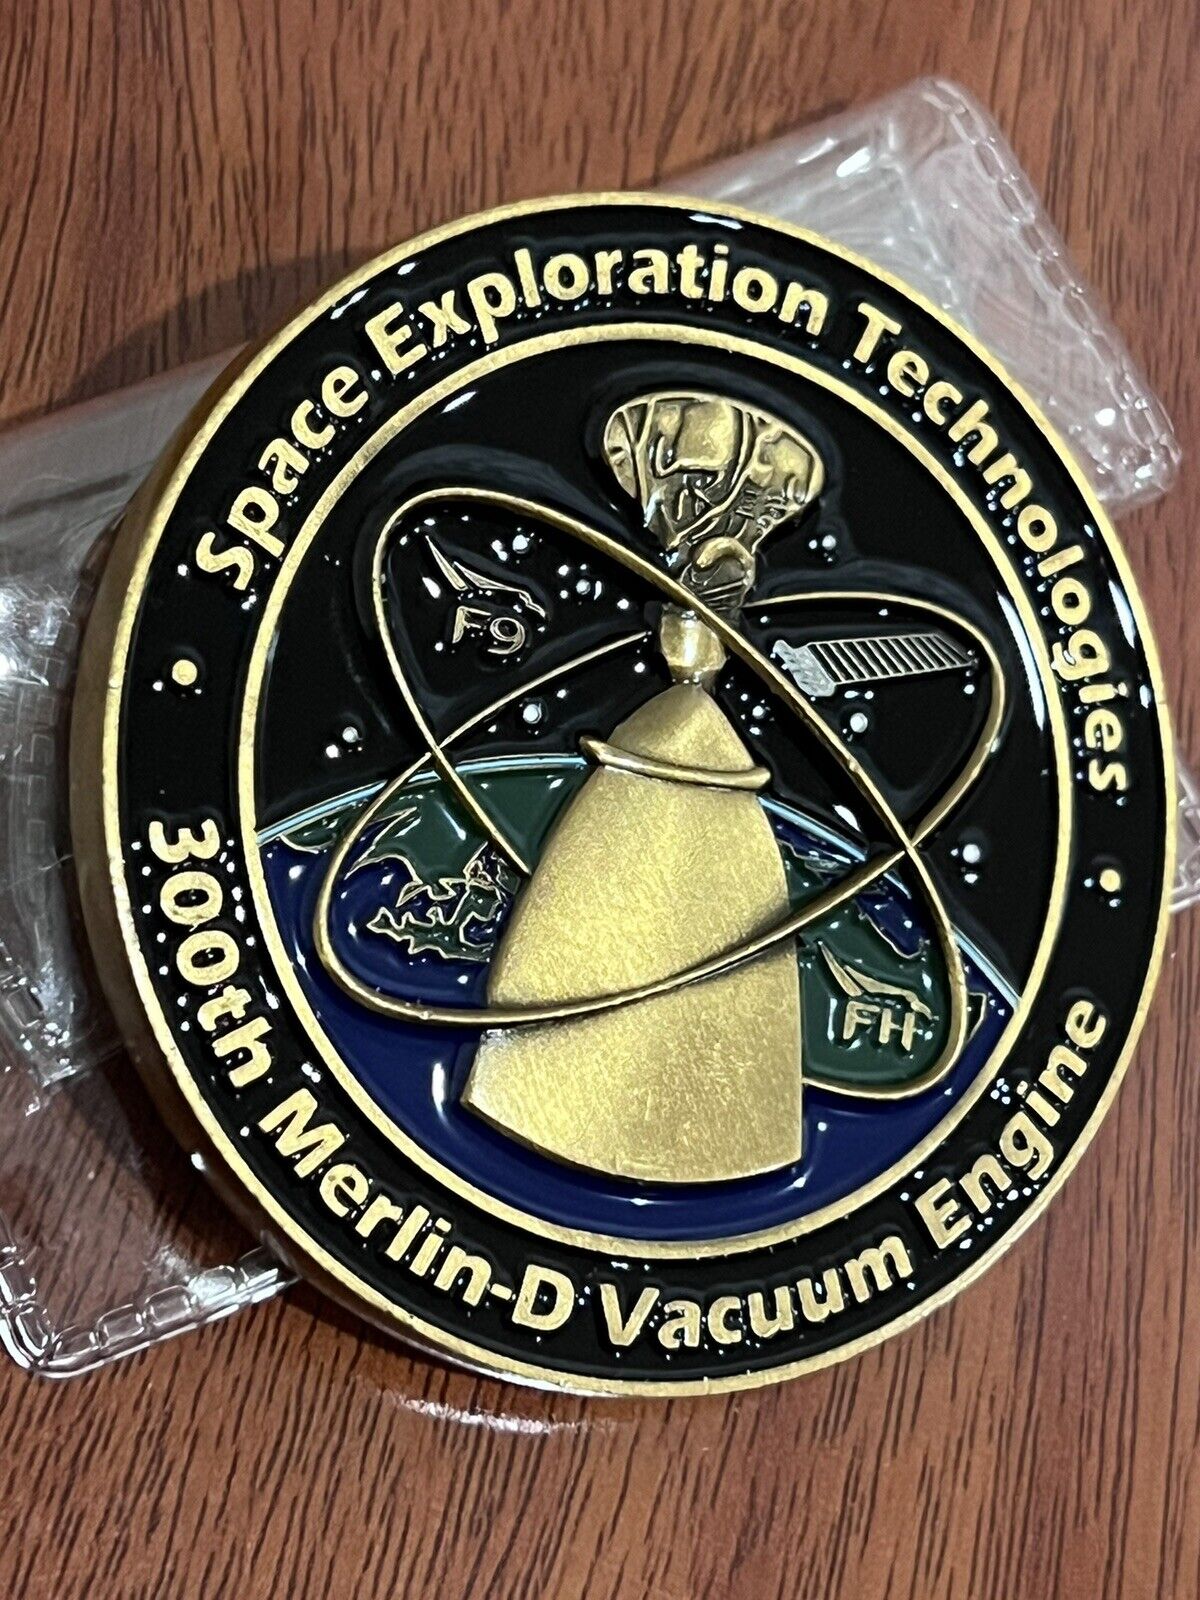 SpaceX - 300th Merlin D Vacuum Engine Commemorative Coin